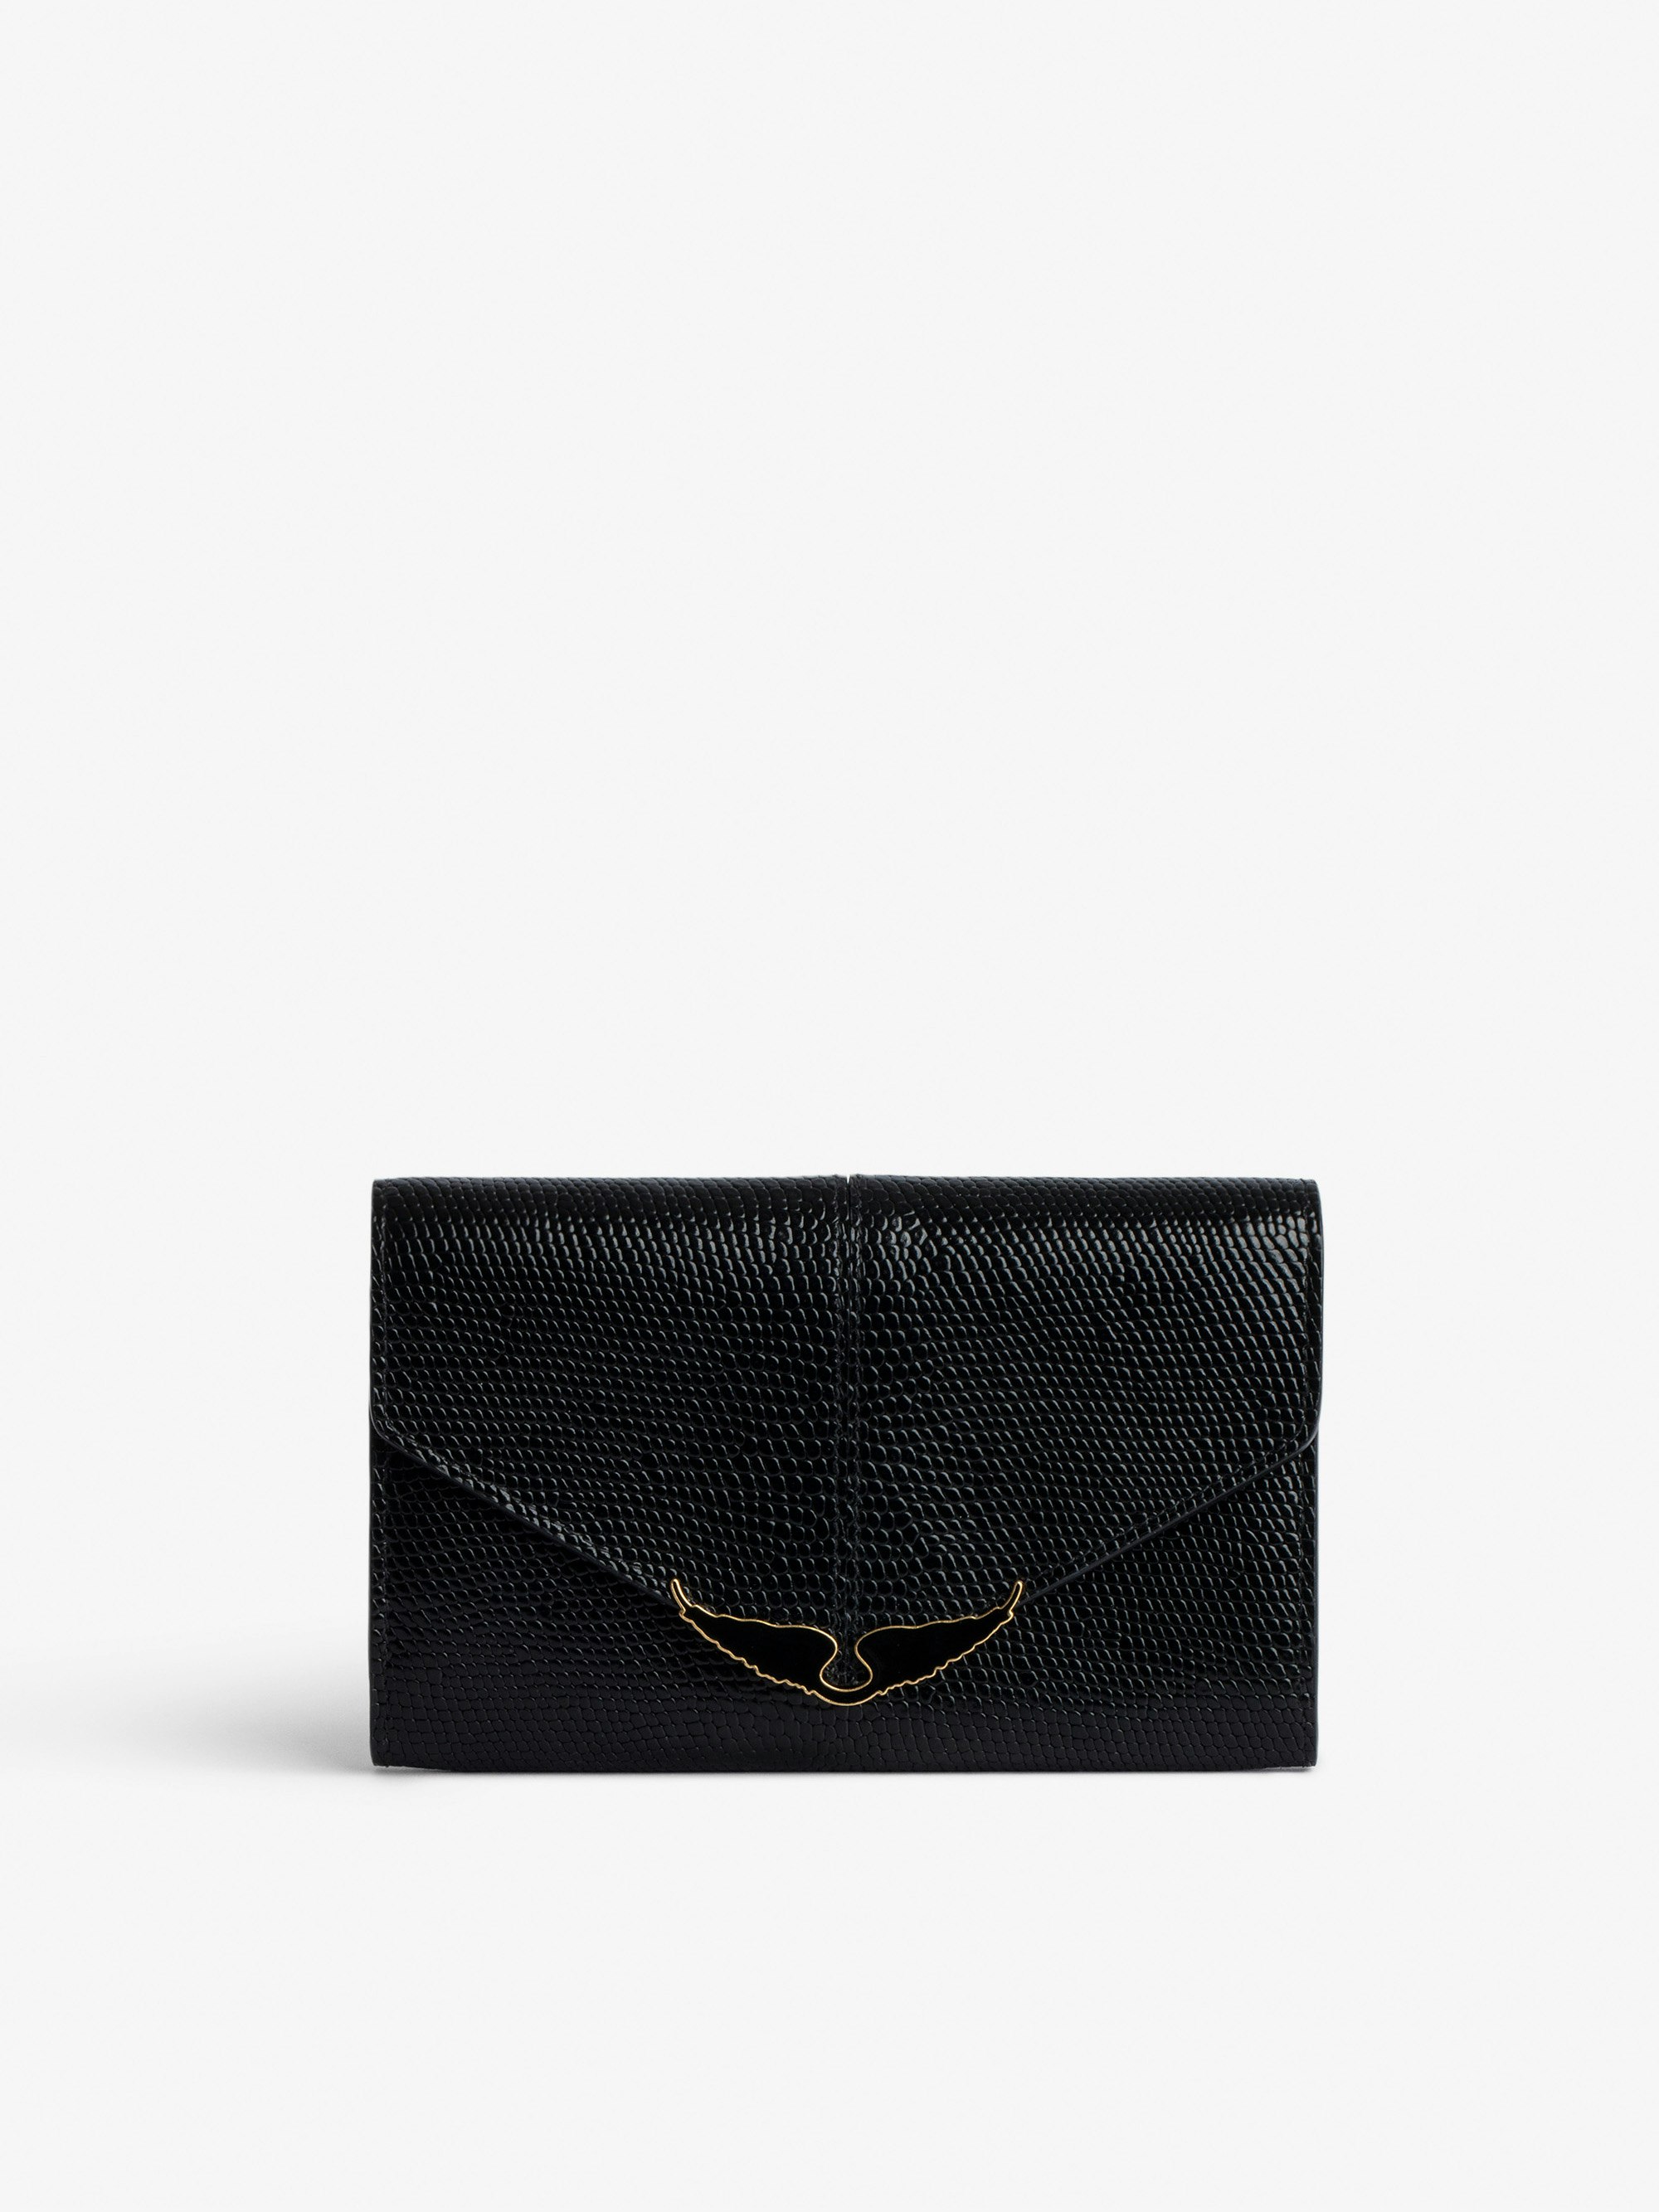 Borderline Wallet - Women’s wallet in shiny black leather with embossed iguana and black lacquered wings on the clasp